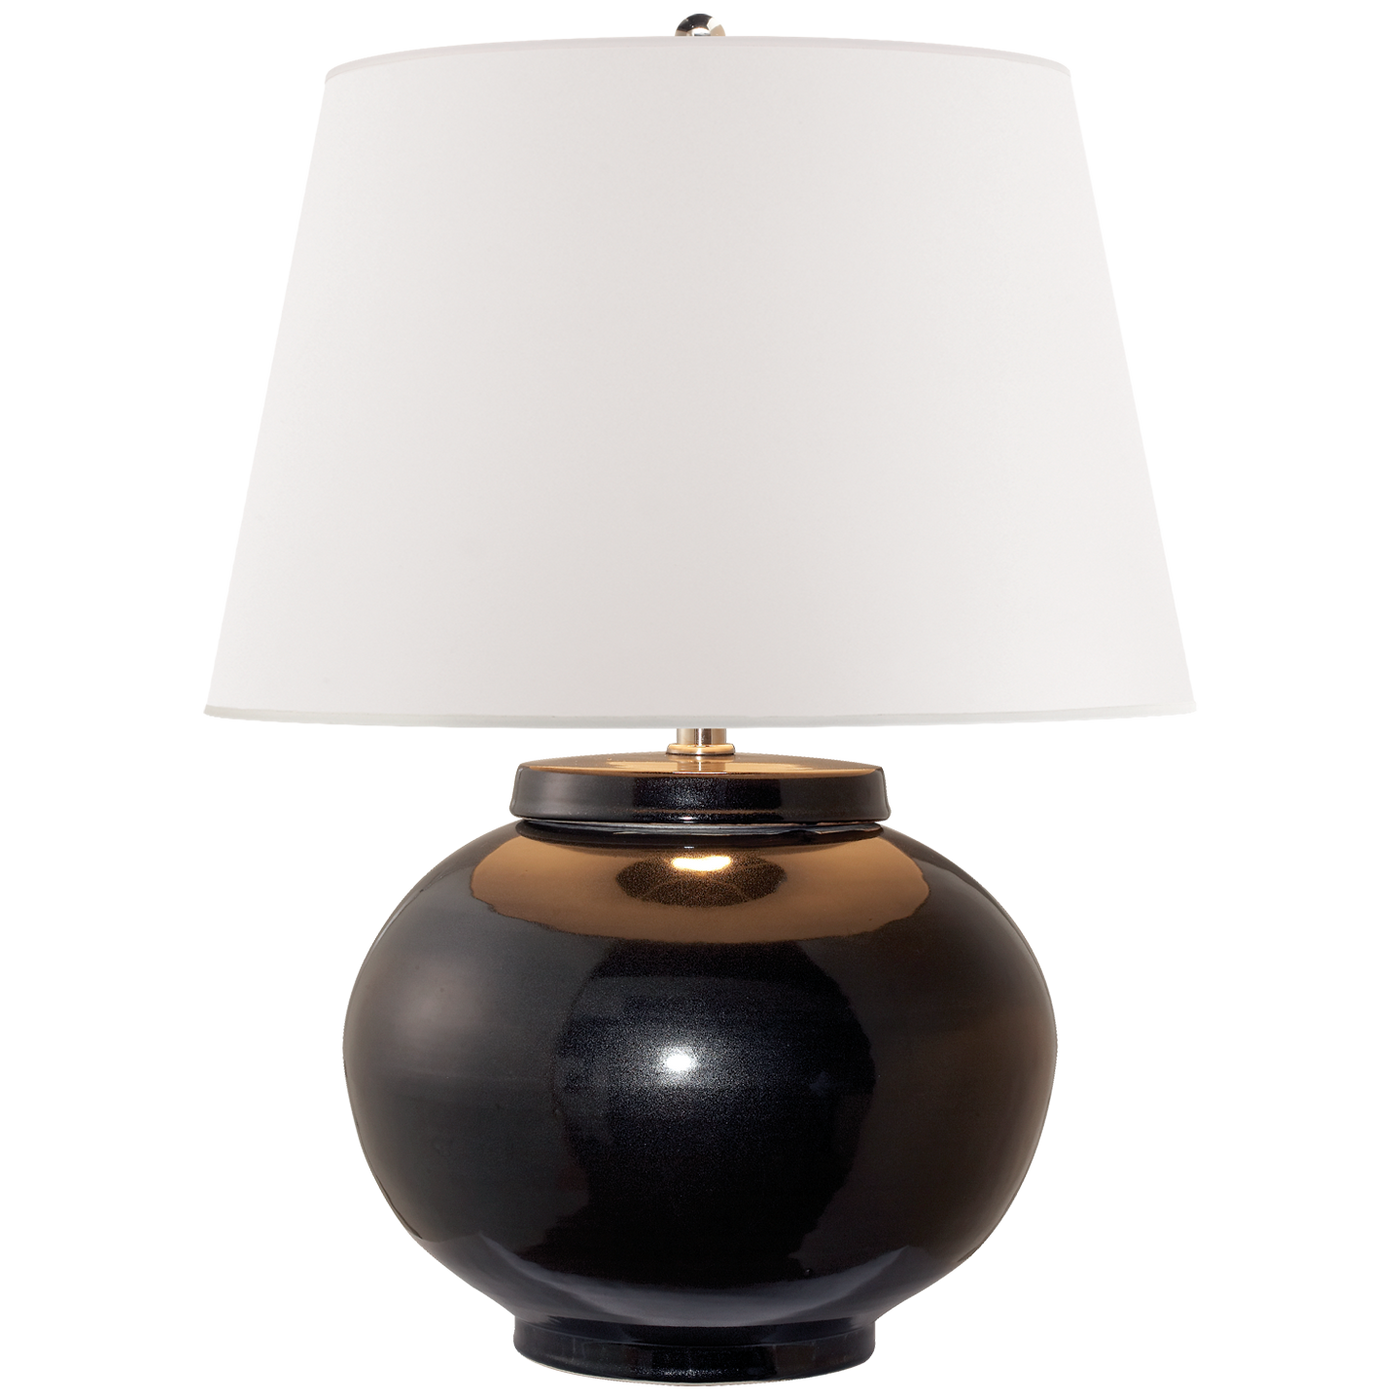 TABLE LAMP ROUND BLACK PORCELAIN SMALL